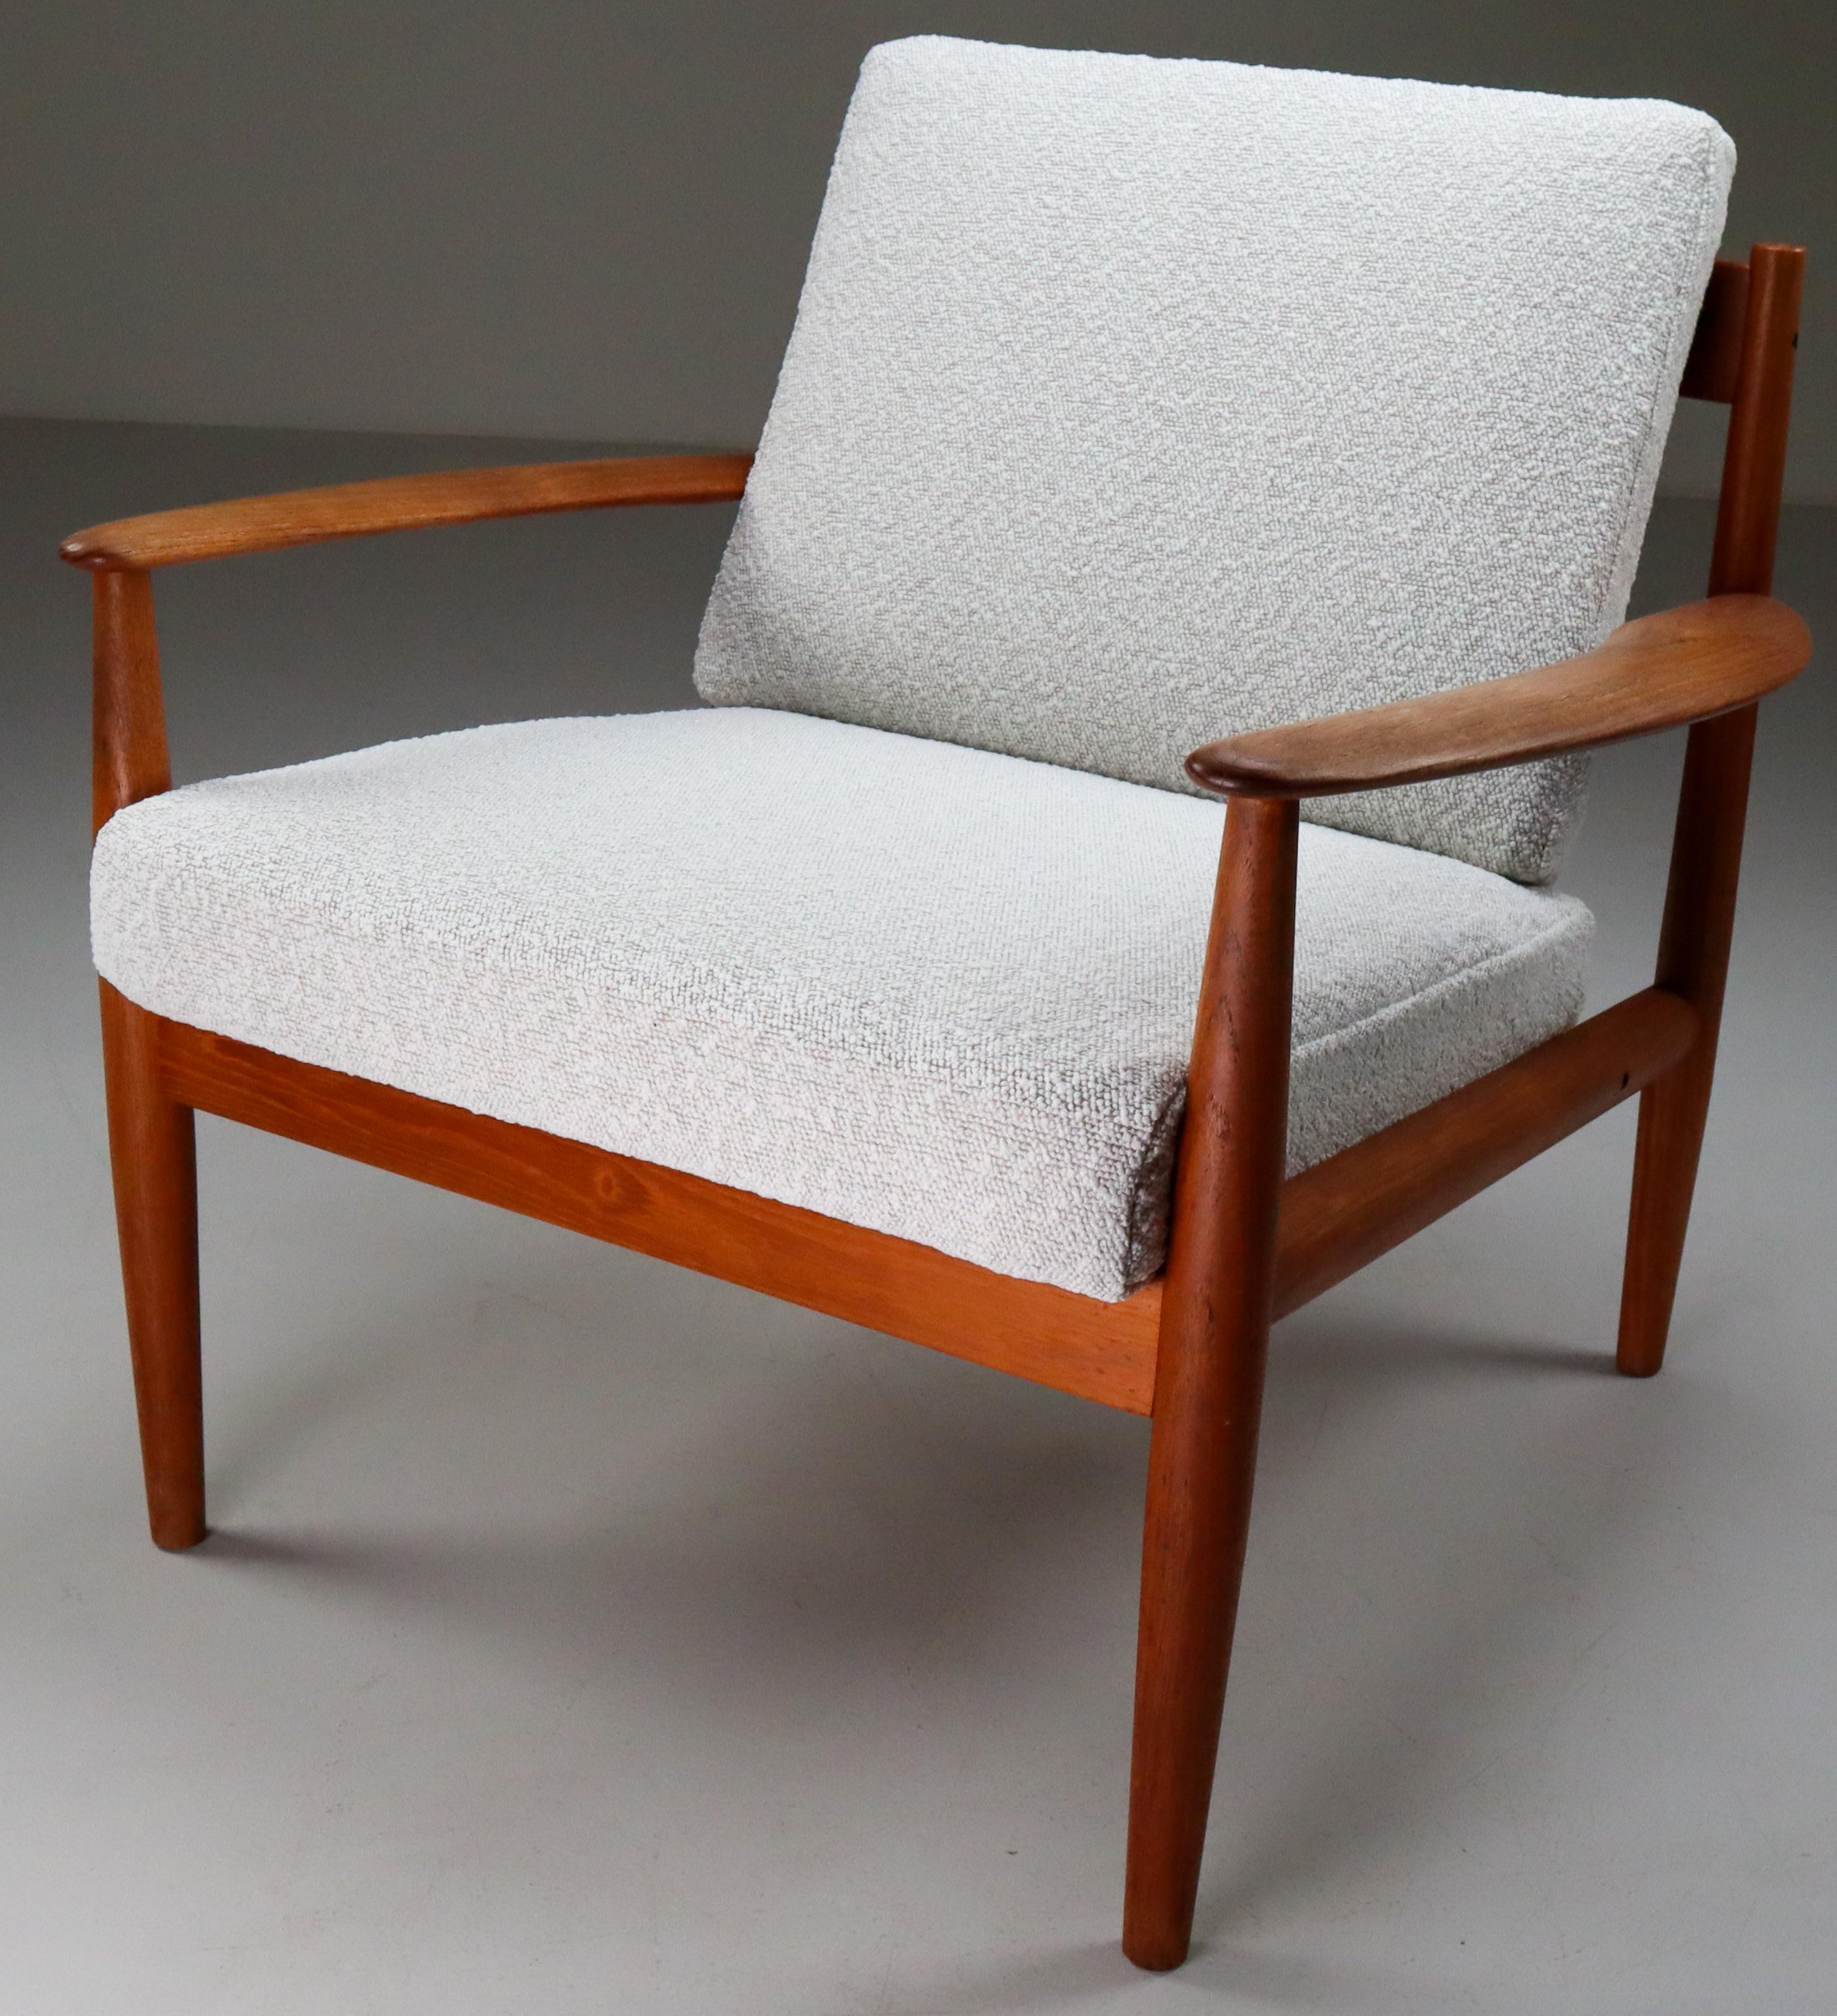 Elegant lounge chair designed by one of the few female midcentury furniture designers, Grete Jalk, in Denmark for France & Søn, circa 1960s. Constructed of teak wood and reupholstery bouclé cushions, two curved slats adorn the open back of this